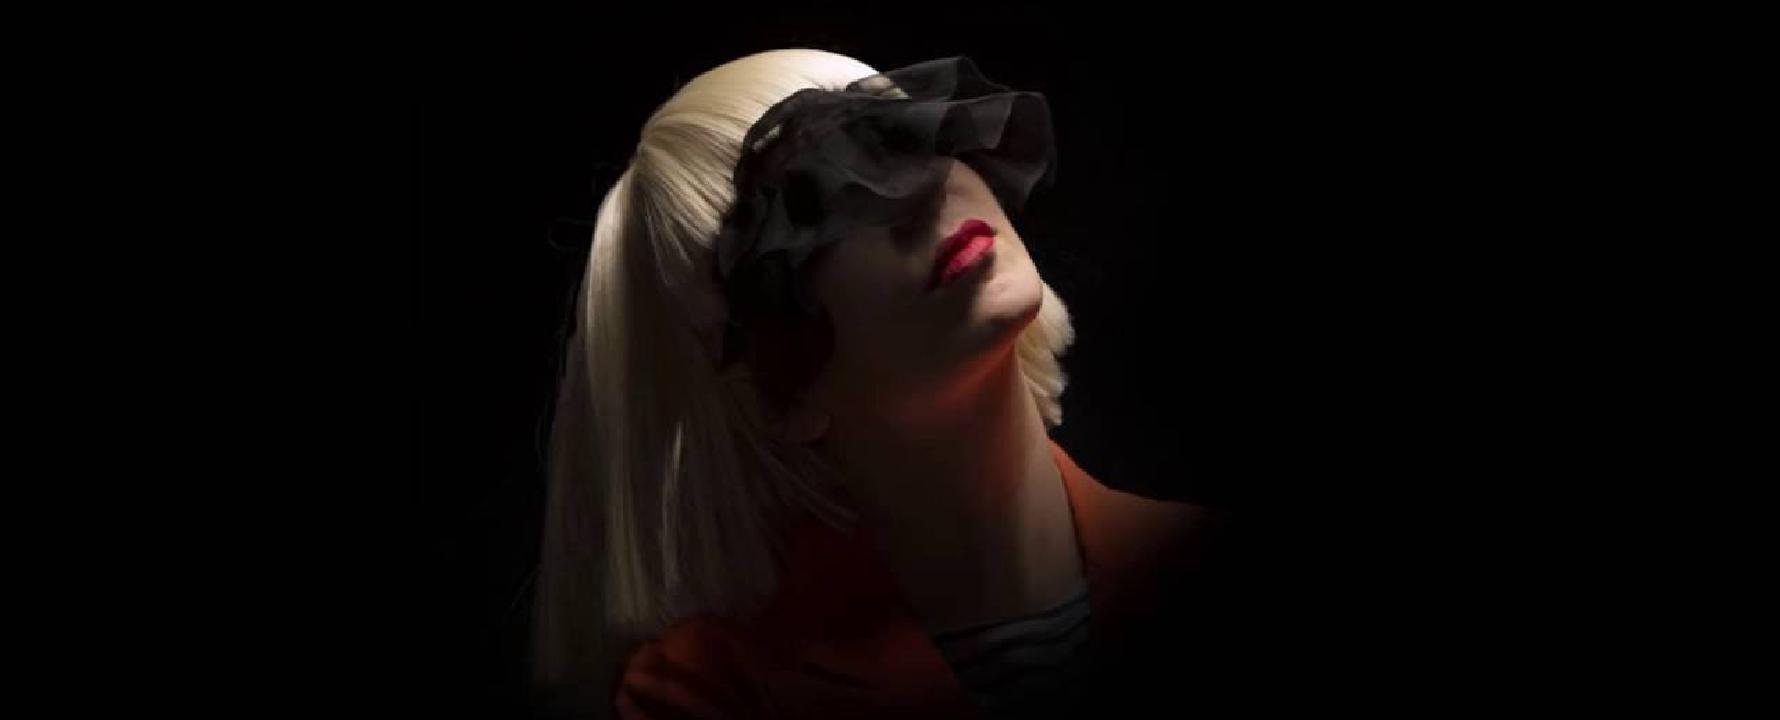 Promotional photograph of Sia.